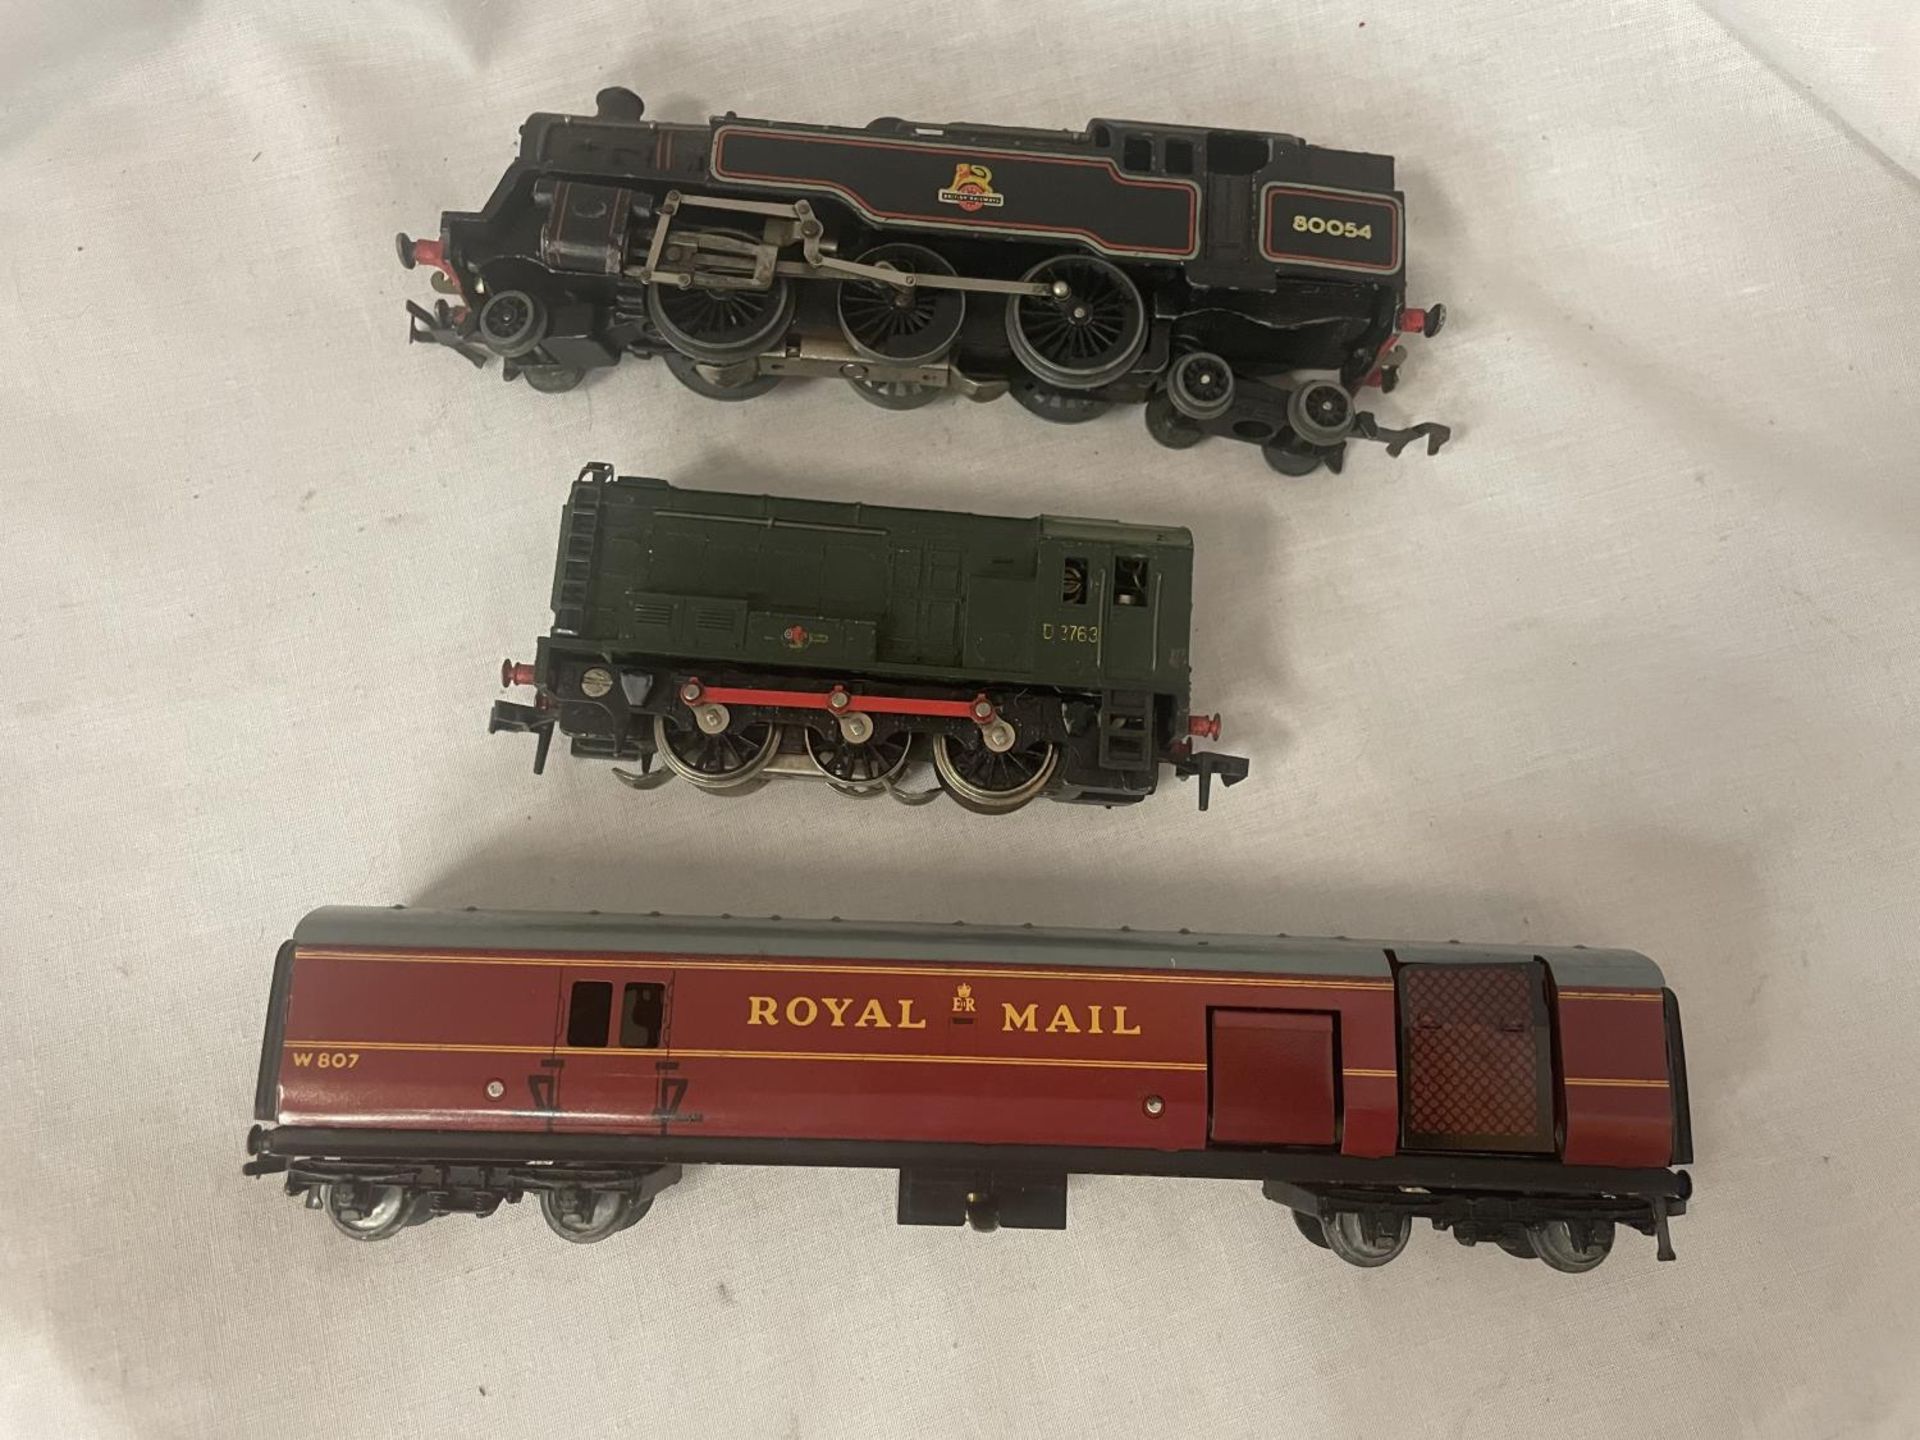 VARIOUS HORNBY DUBLO ITEMS - A BRITICH RAIL 2-6-4 LOCOMOTIVE NUMBER 80054, A BRITISH RAIL 0-6-0 TANK - Image 5 of 5